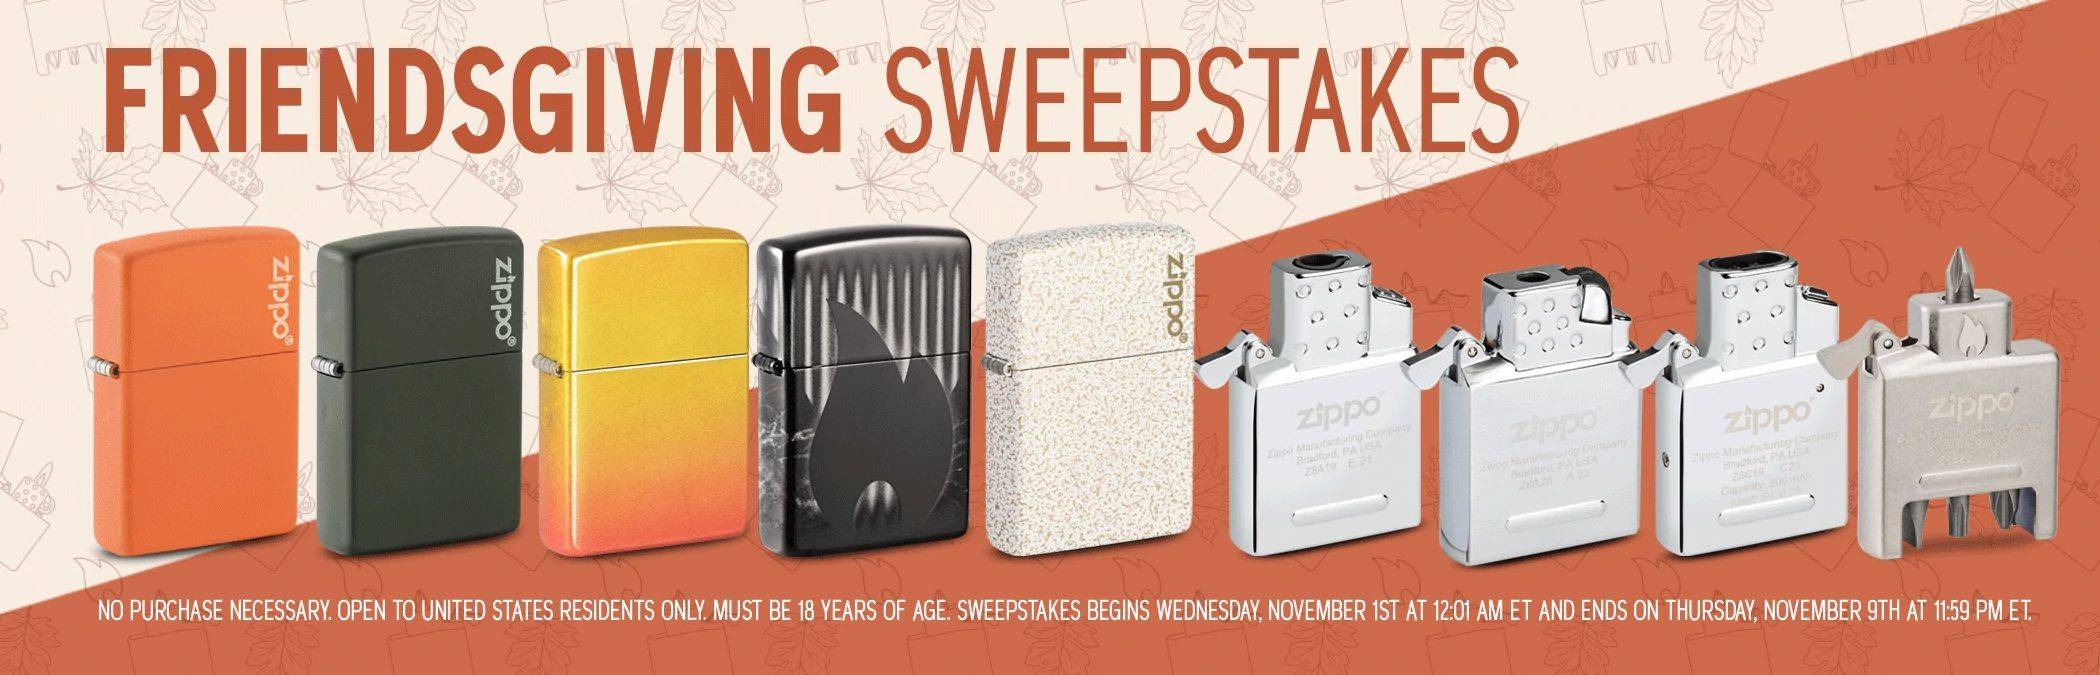 Friendsgiving Sweepstakes title with five Zippo lighters and four inserts in a line on a white and orange background. No purchase necessary. Open to United States residents only. Must be 18 years of age. Sweepstakes begins November 1 at 12:01 am ET and ends November 9 at 11:59 p.m. ET